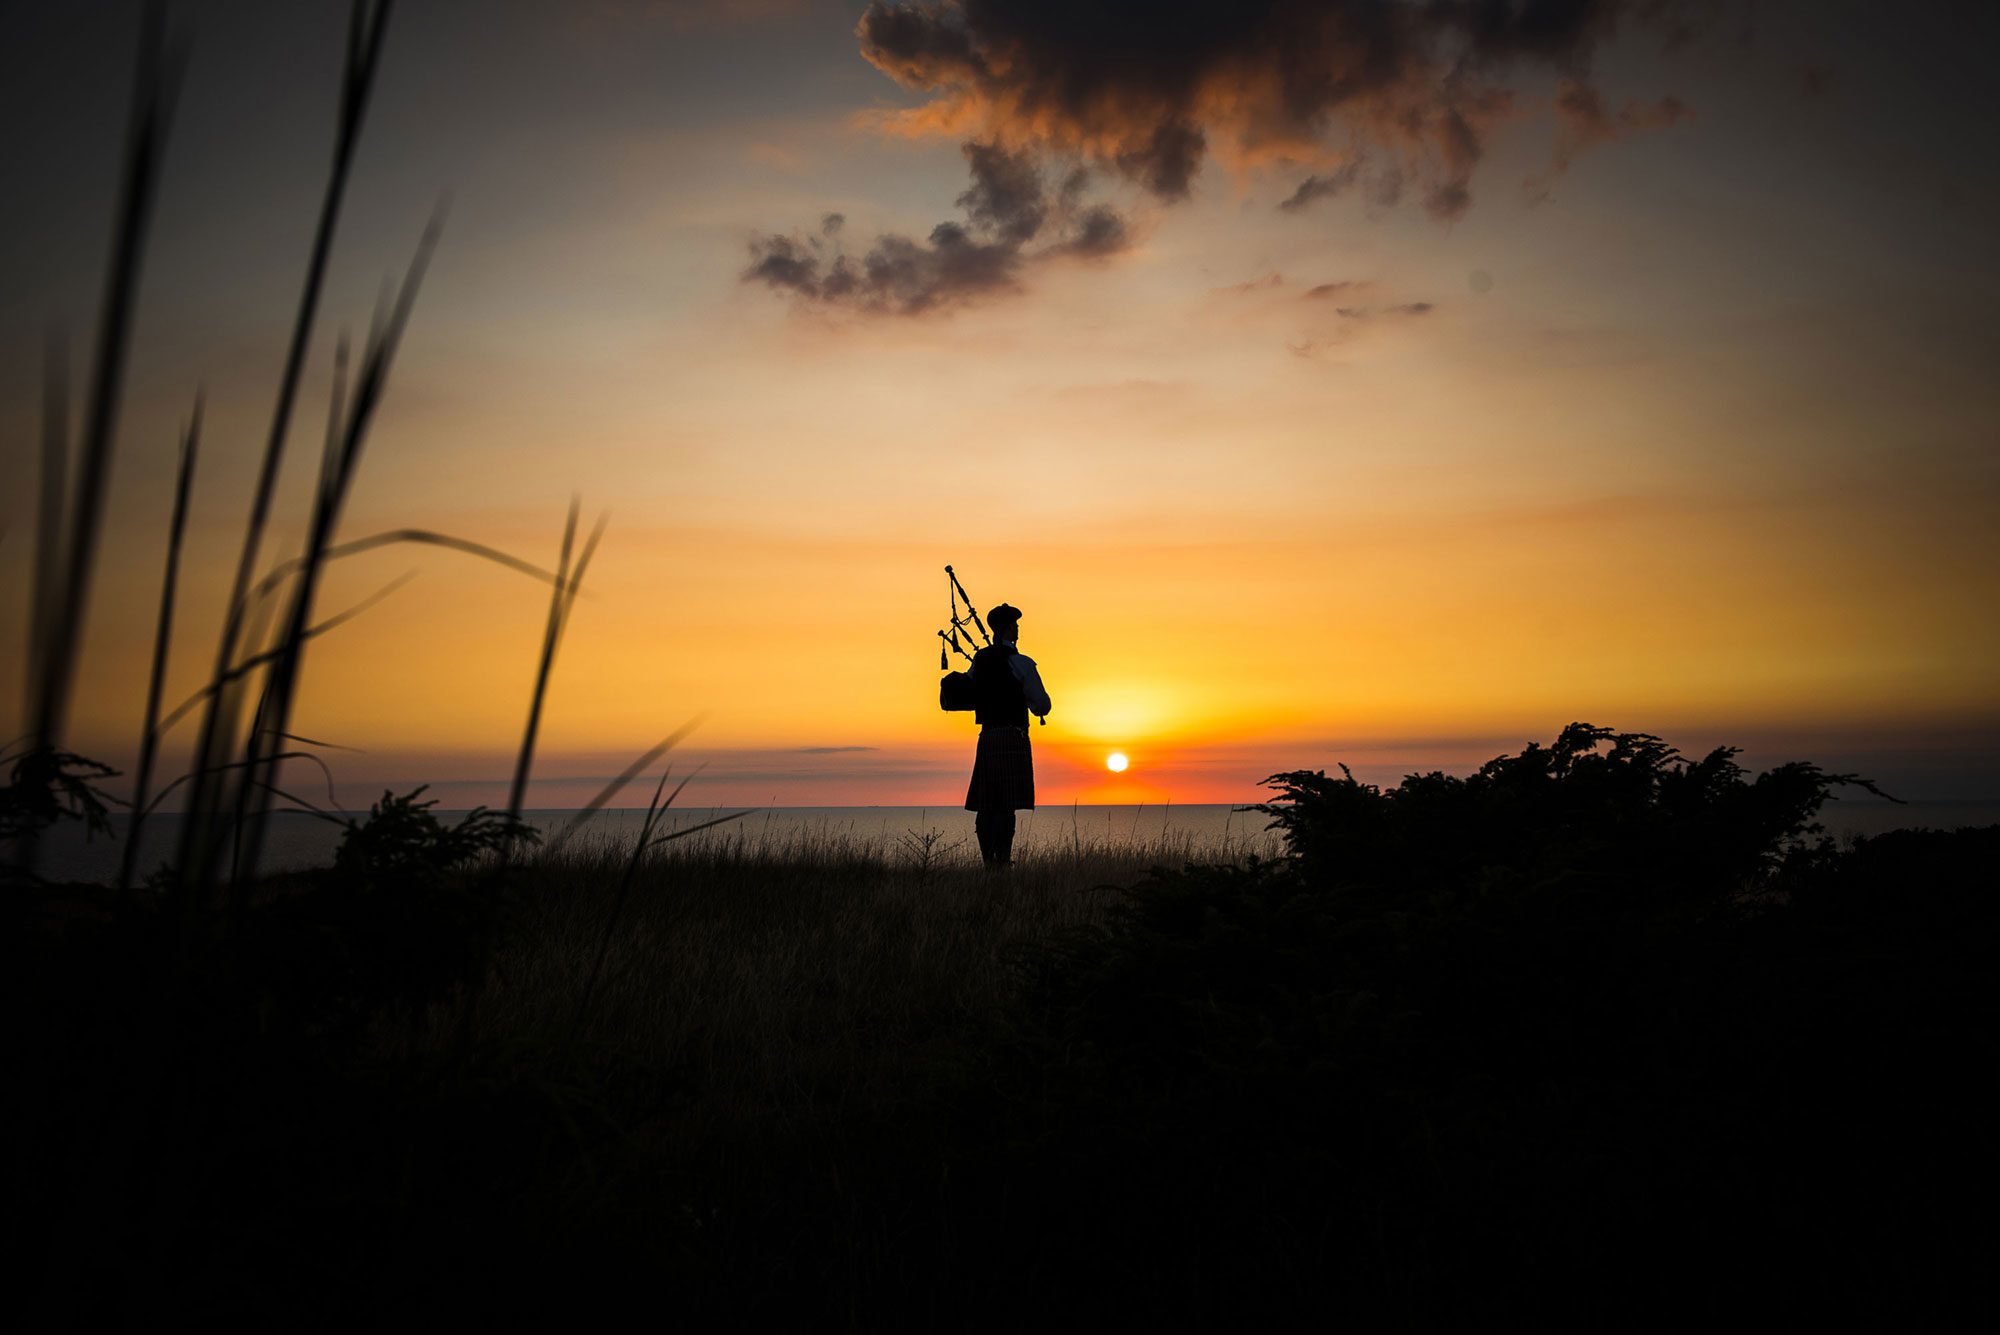 THE BAGPIPER